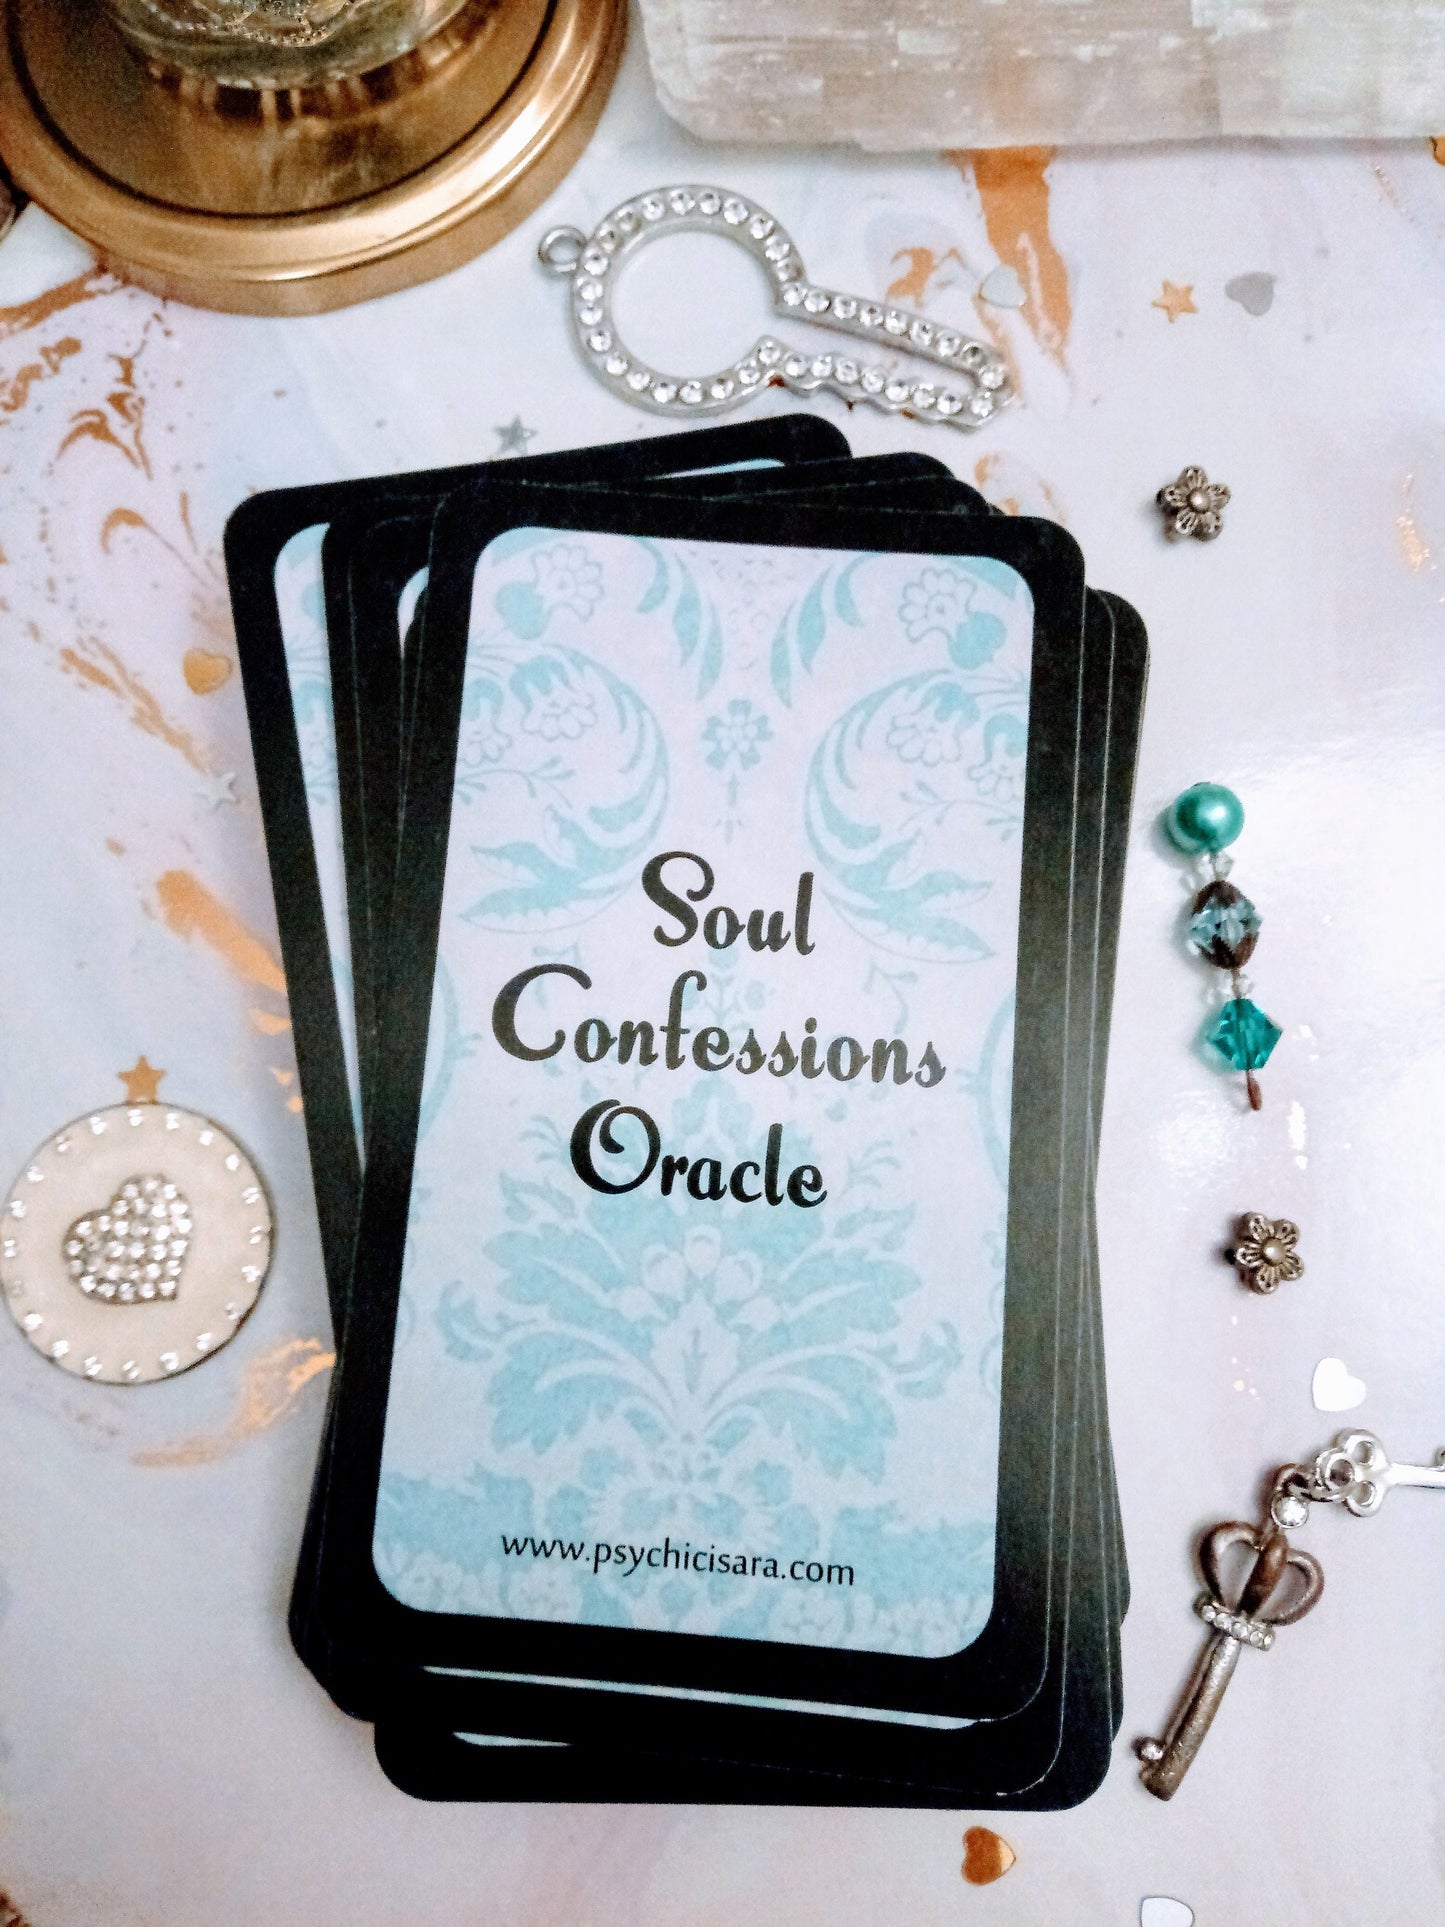 Soul Confessions - guidance from your higher self